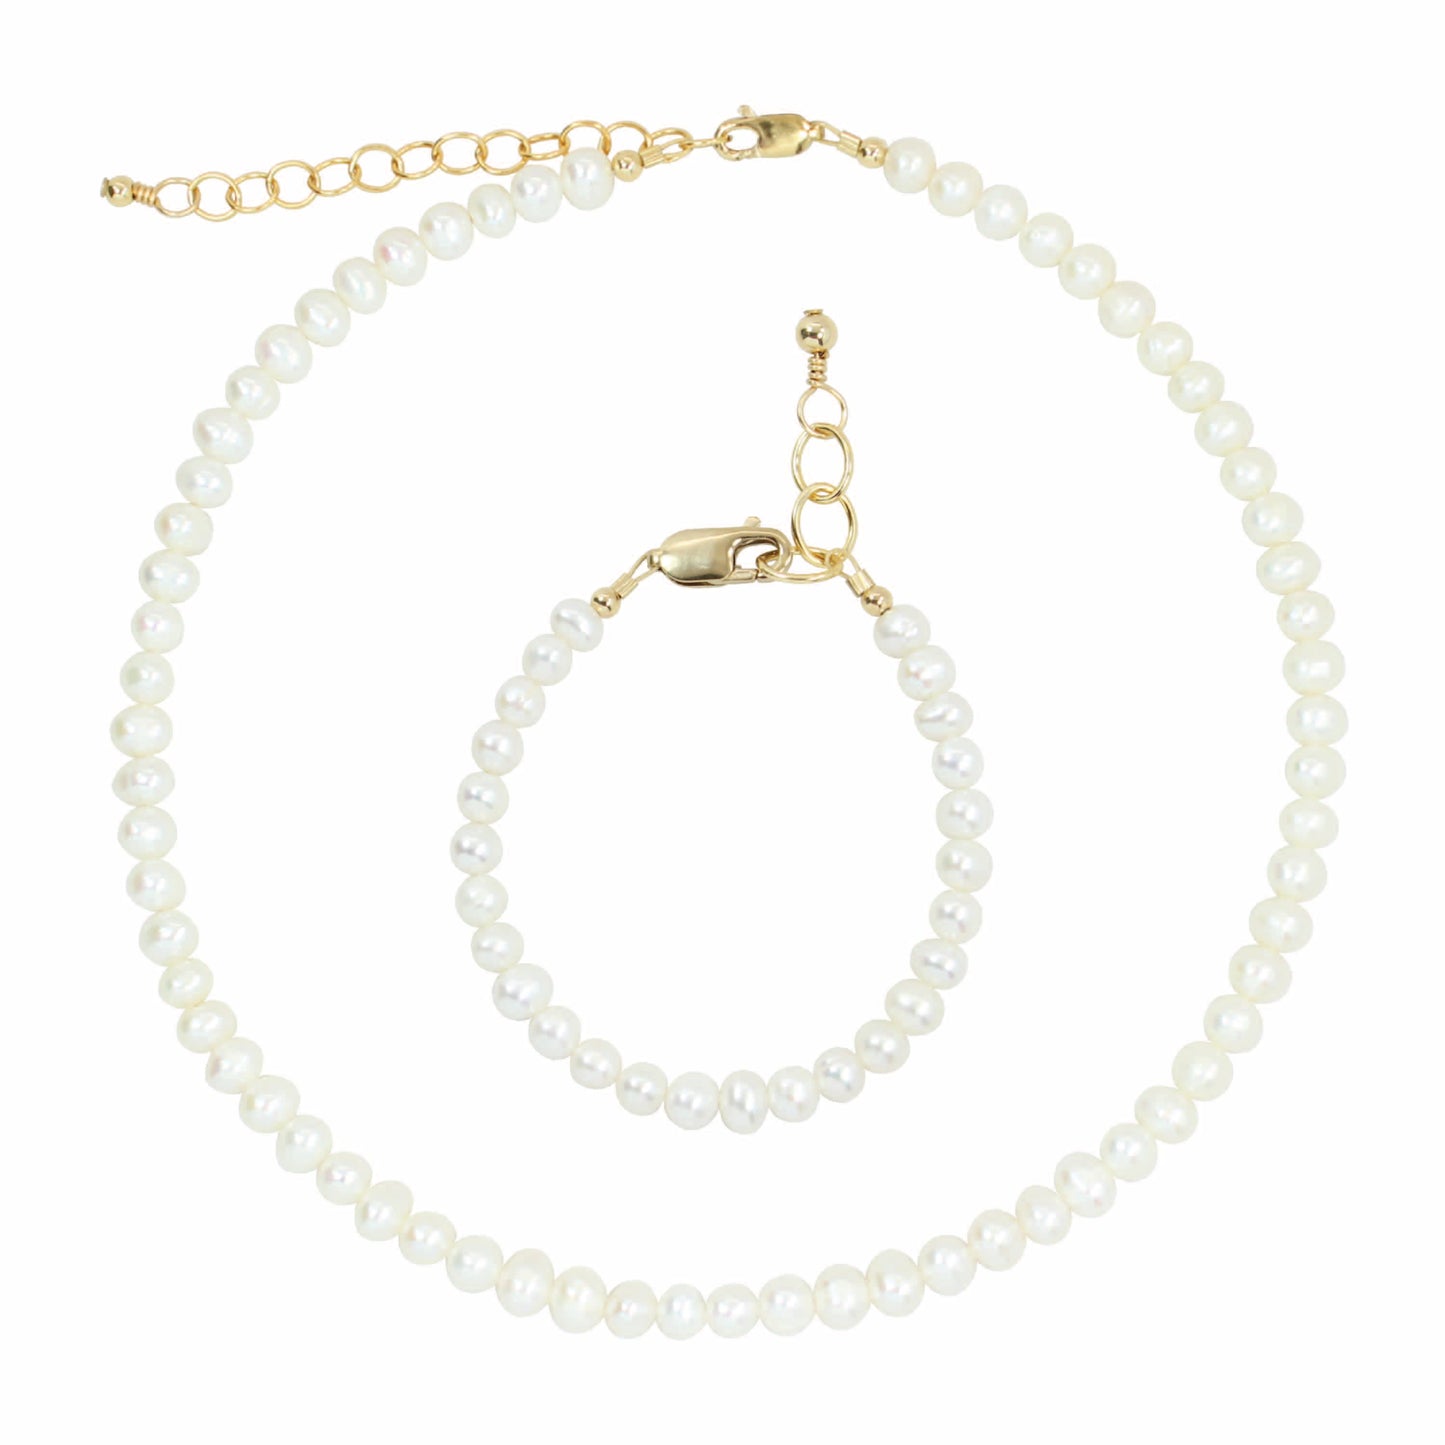 gemsbylaura Freshwater Pearl Necklace + Adult Bracelet Set (6mm Beads) 6.5 Inches / 15 / Sterling Silver